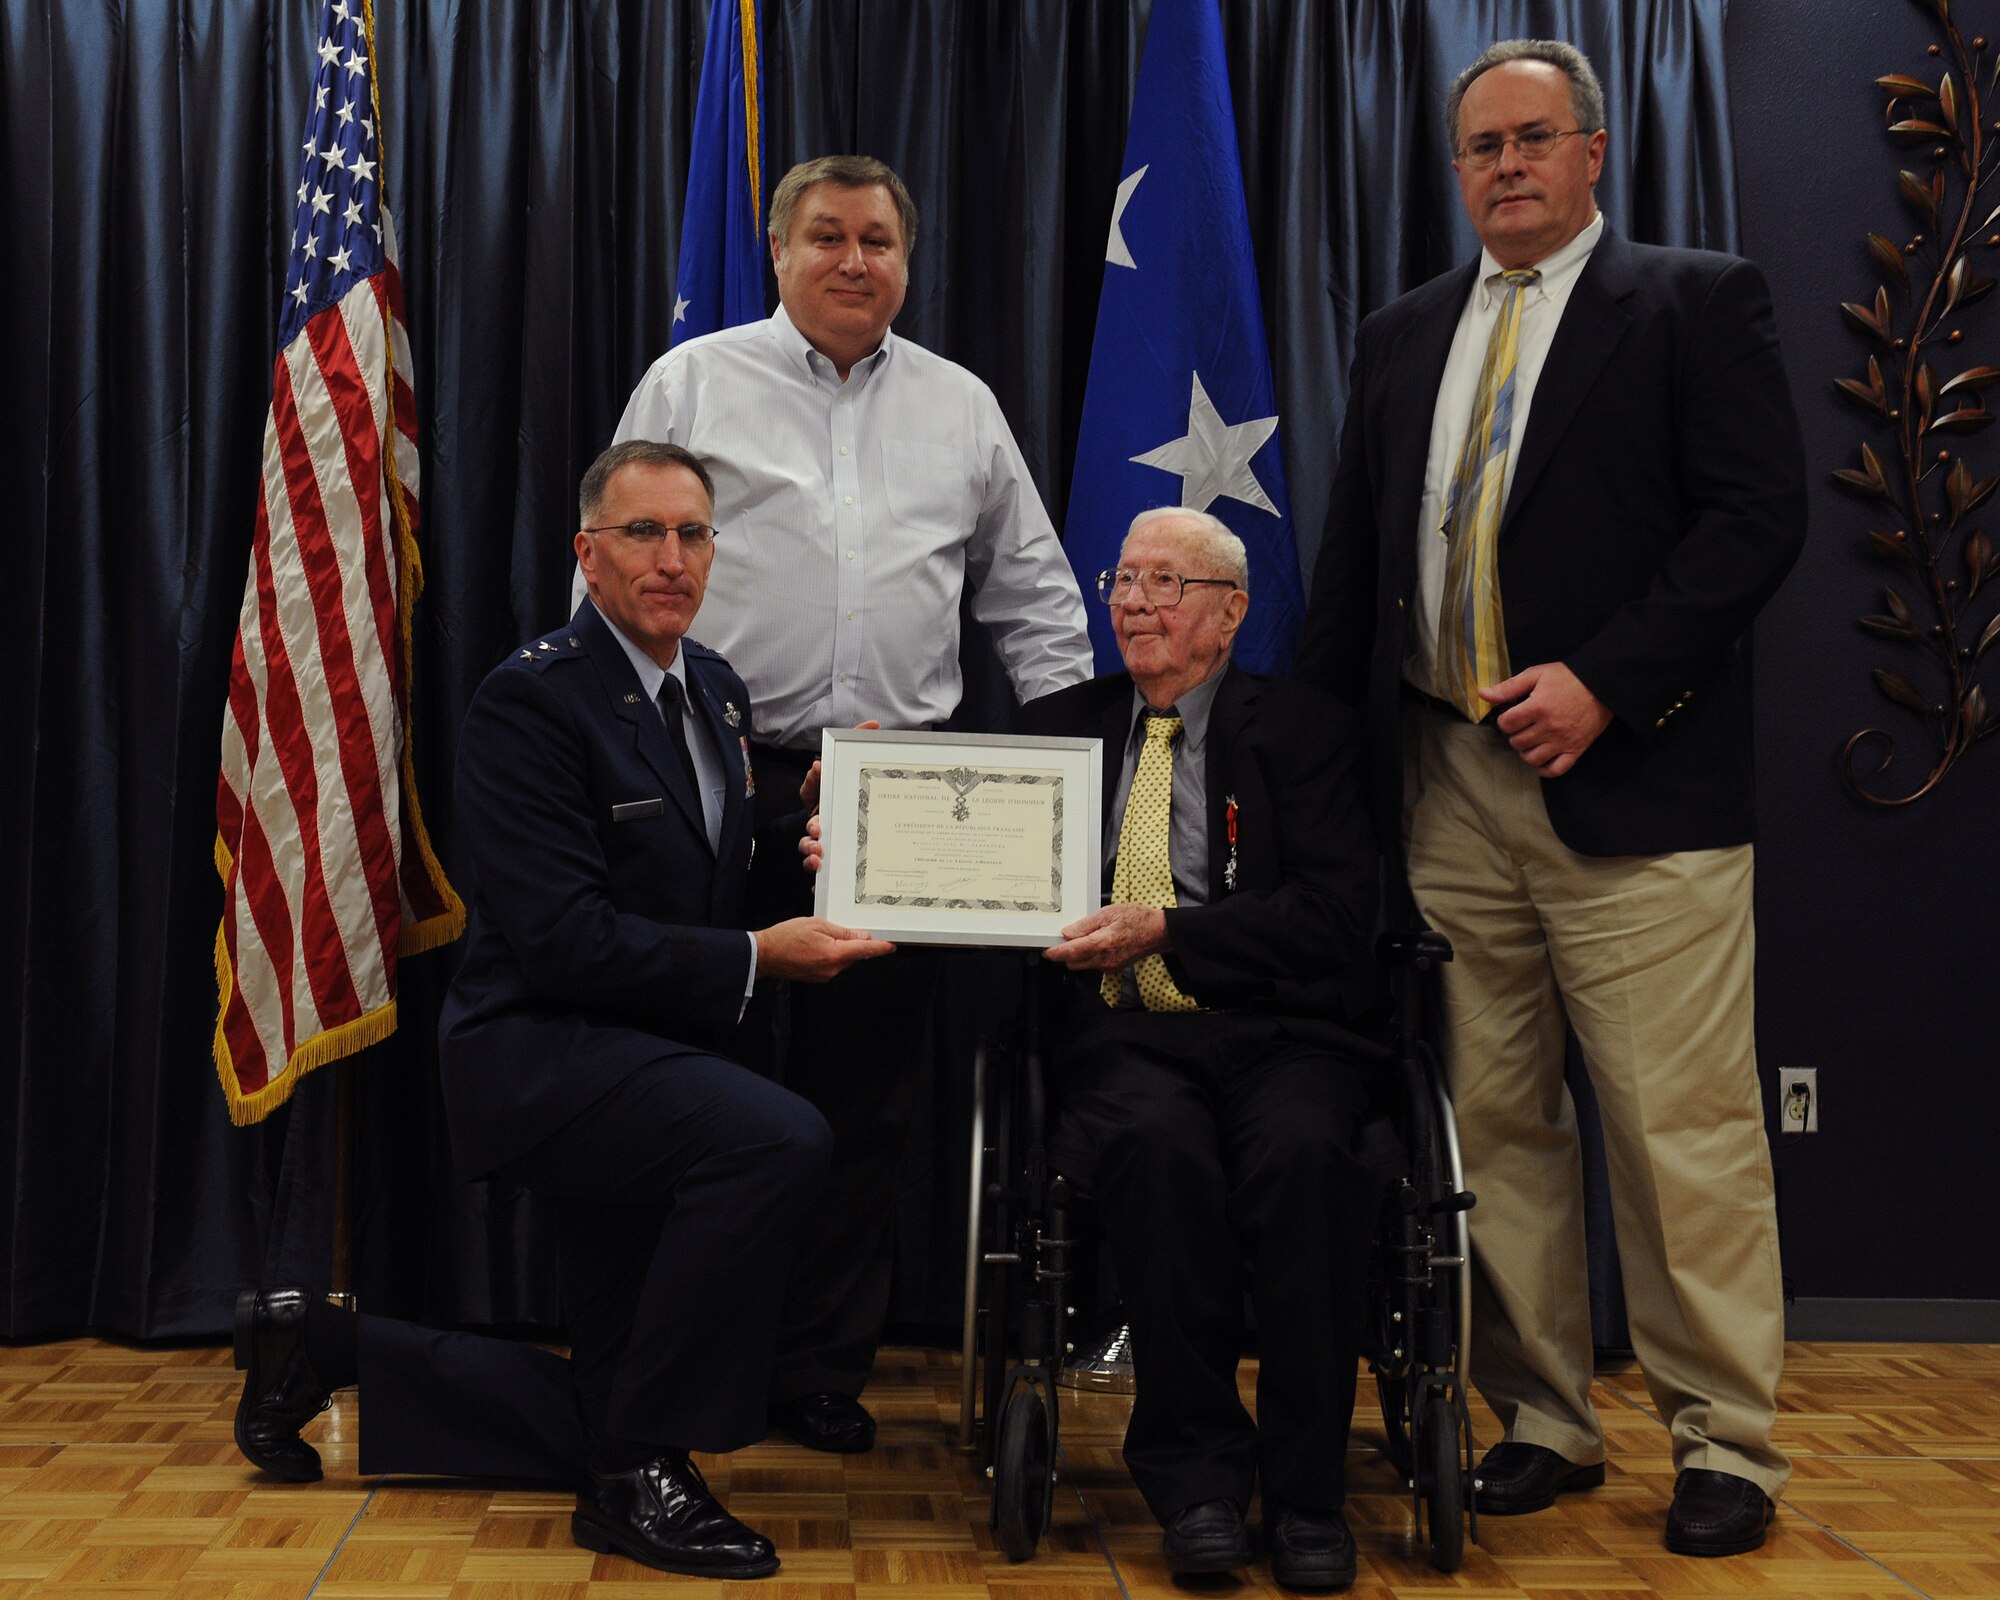 John Carpenter, a World War II veteran, is presented a certificate after receiving the French Legion of Honor from Maj. Gen. Scott Vander Hamm, 8th Air Force commander, on Barksdale Air Force Base, La., July 1, 2014. The Legion of Honor is one of the highest recognitions an individual can receive from the French government. While there is a limit to how many awards can be presented, an exception was made for service members who fought on French soil during World War II. (U.S. Air Force photo/Senior Airman Benjamin Gonsier)